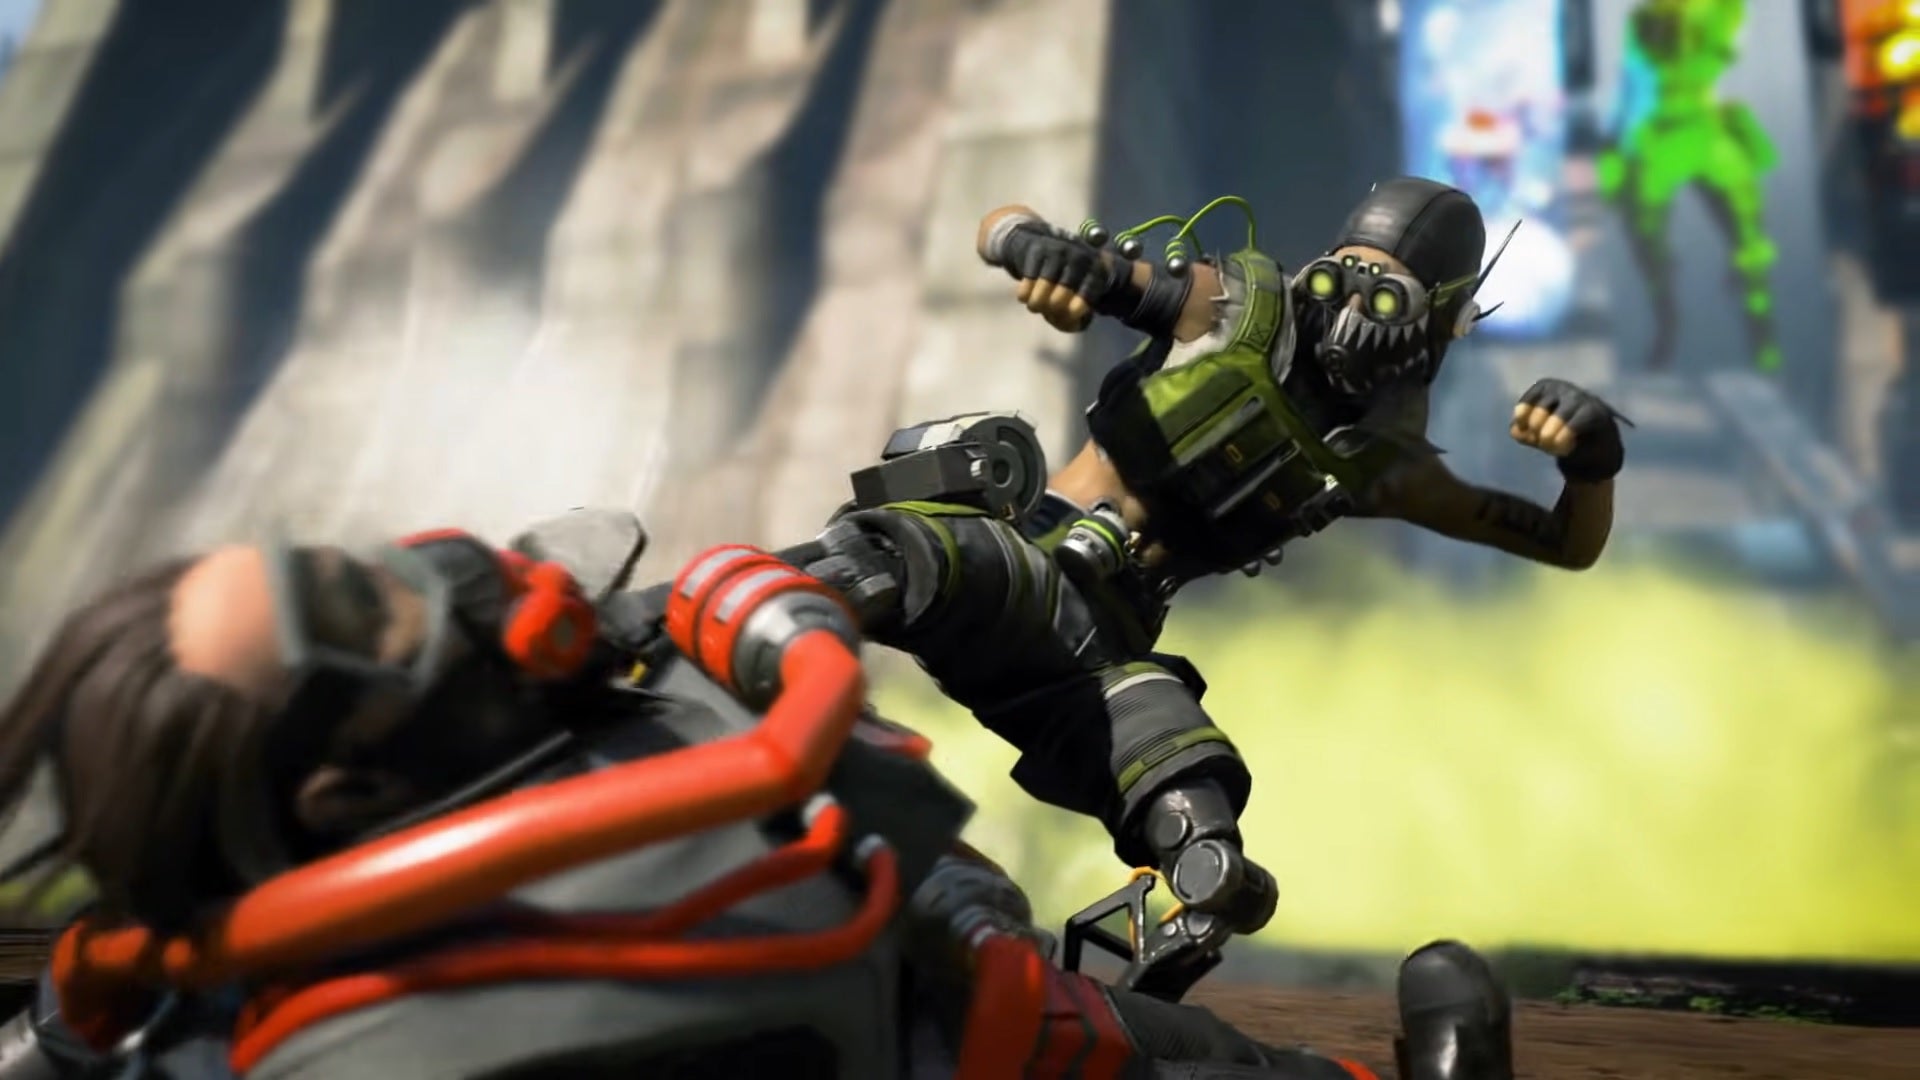 Octane from Apex Legends executing another Character (in game)